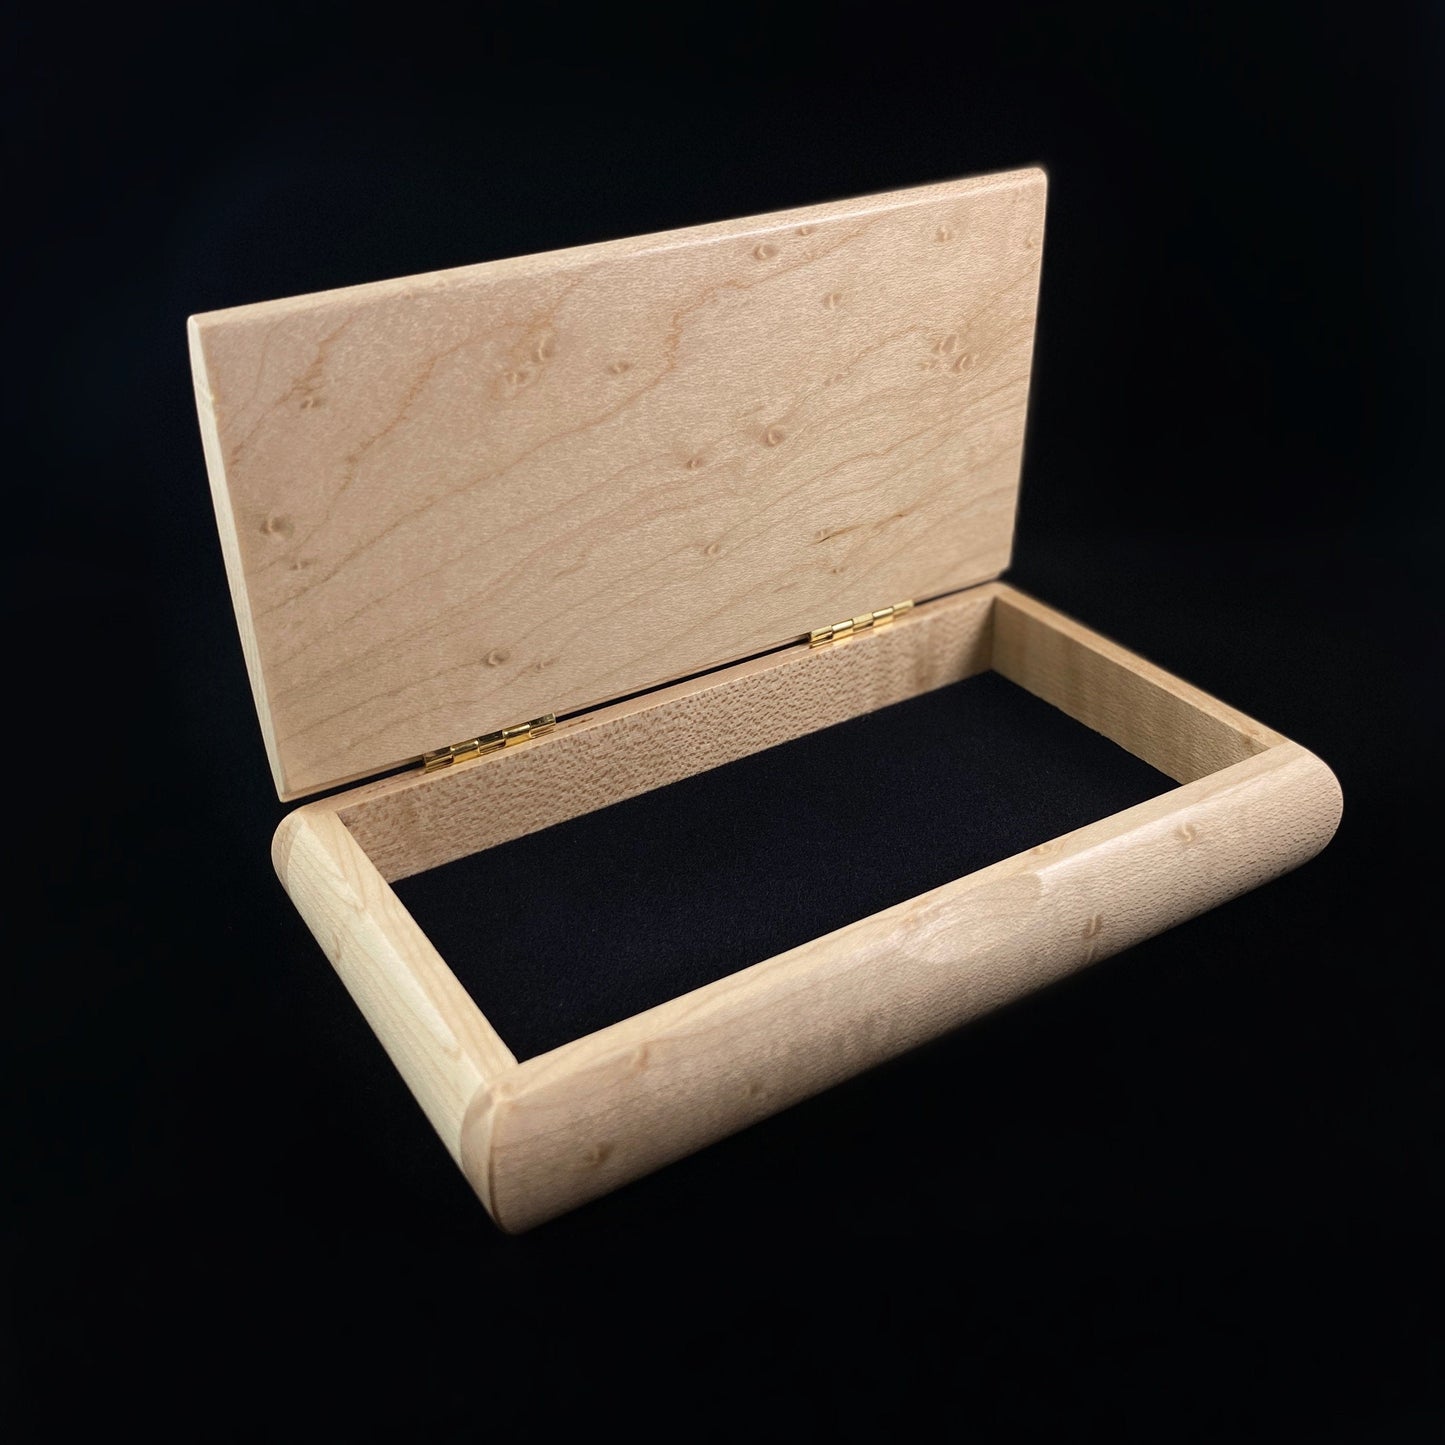 Handmade Wooden Box with Birdseye Maple, Made in USA